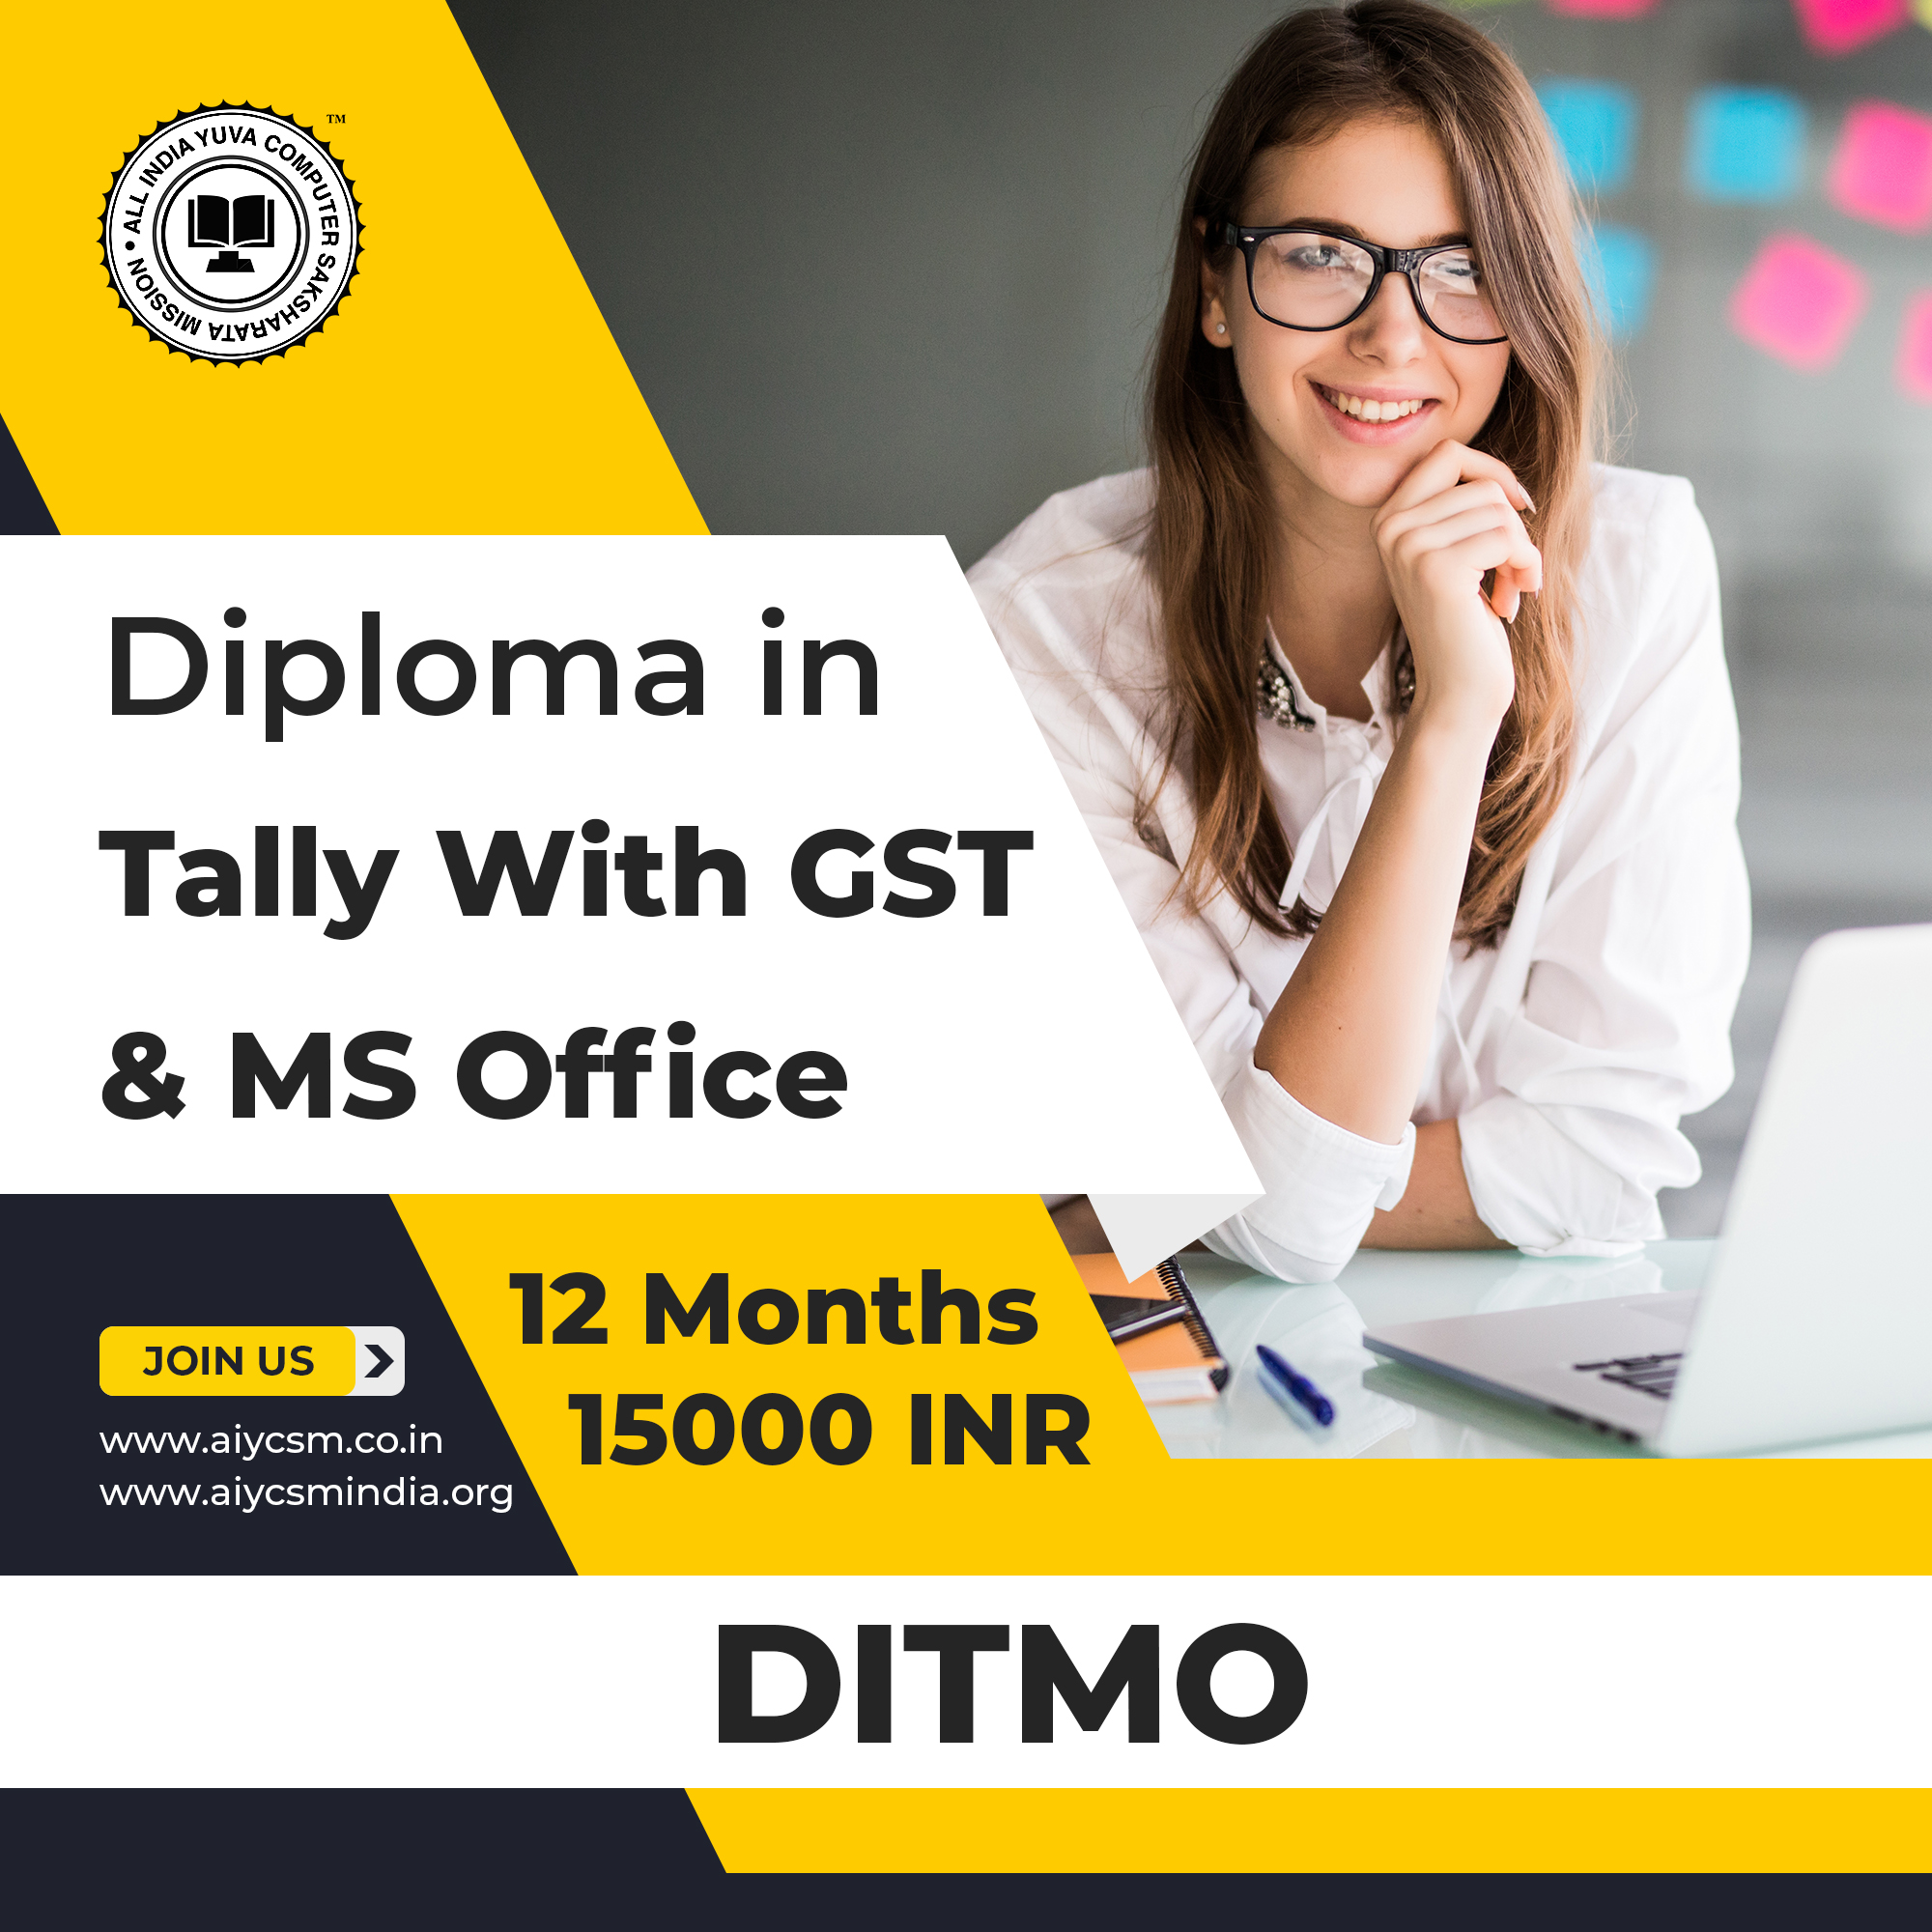 Diploma In Tally With GST & MS Office